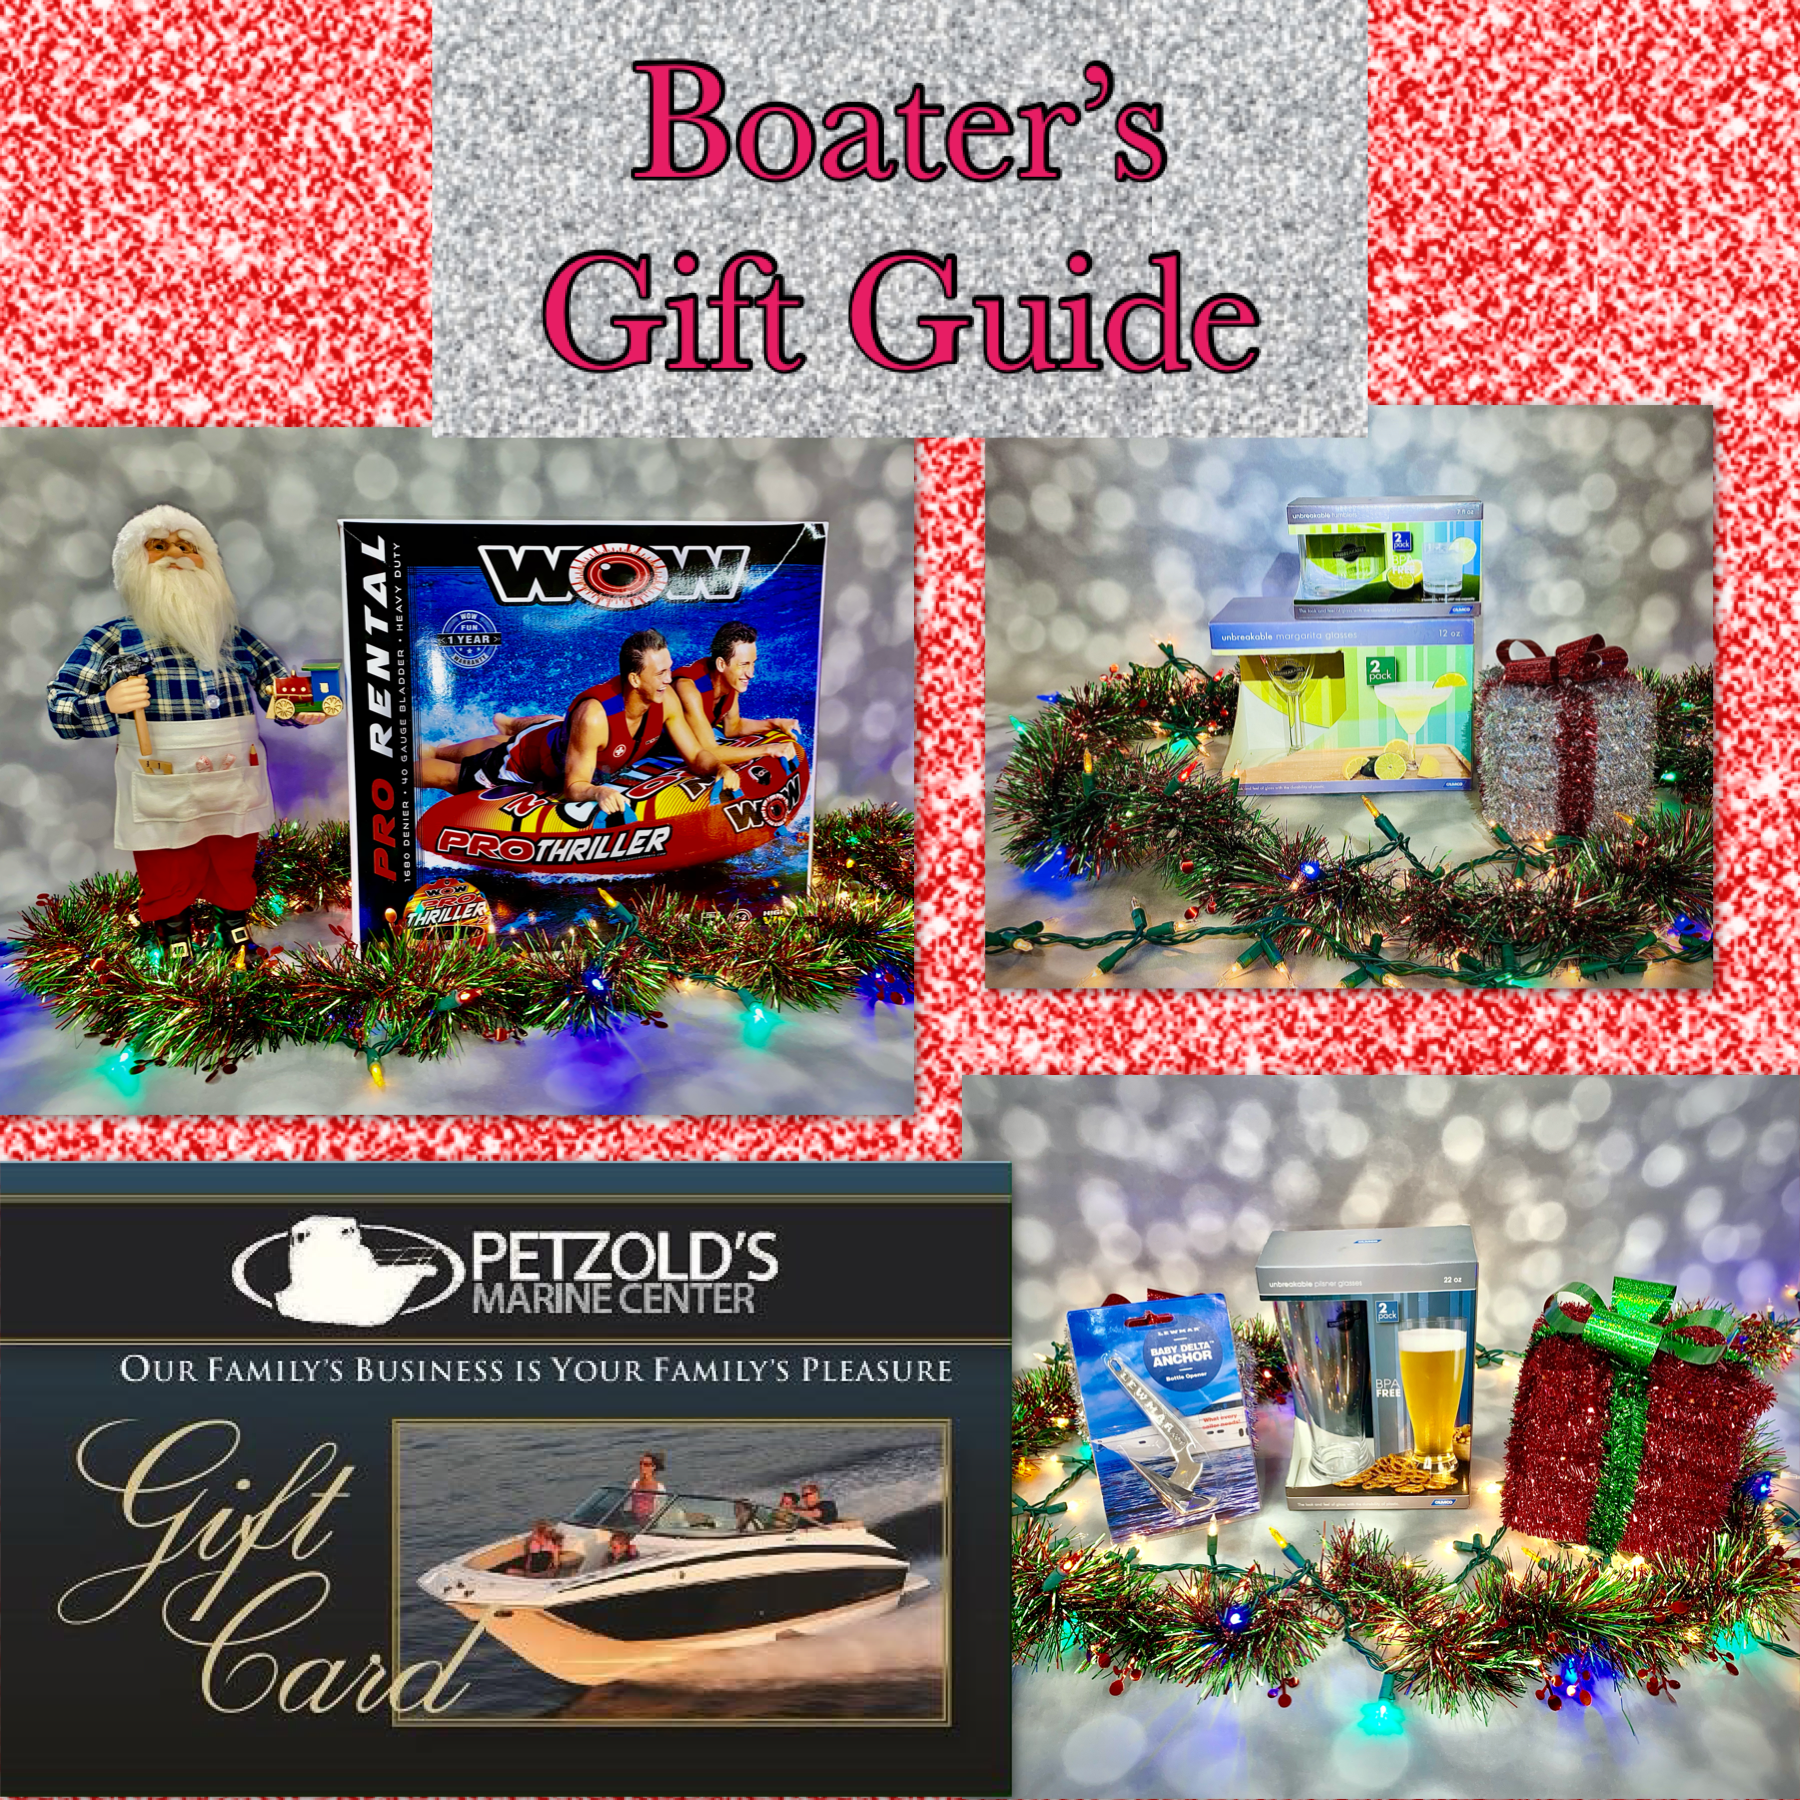 Boater's Gift Guide